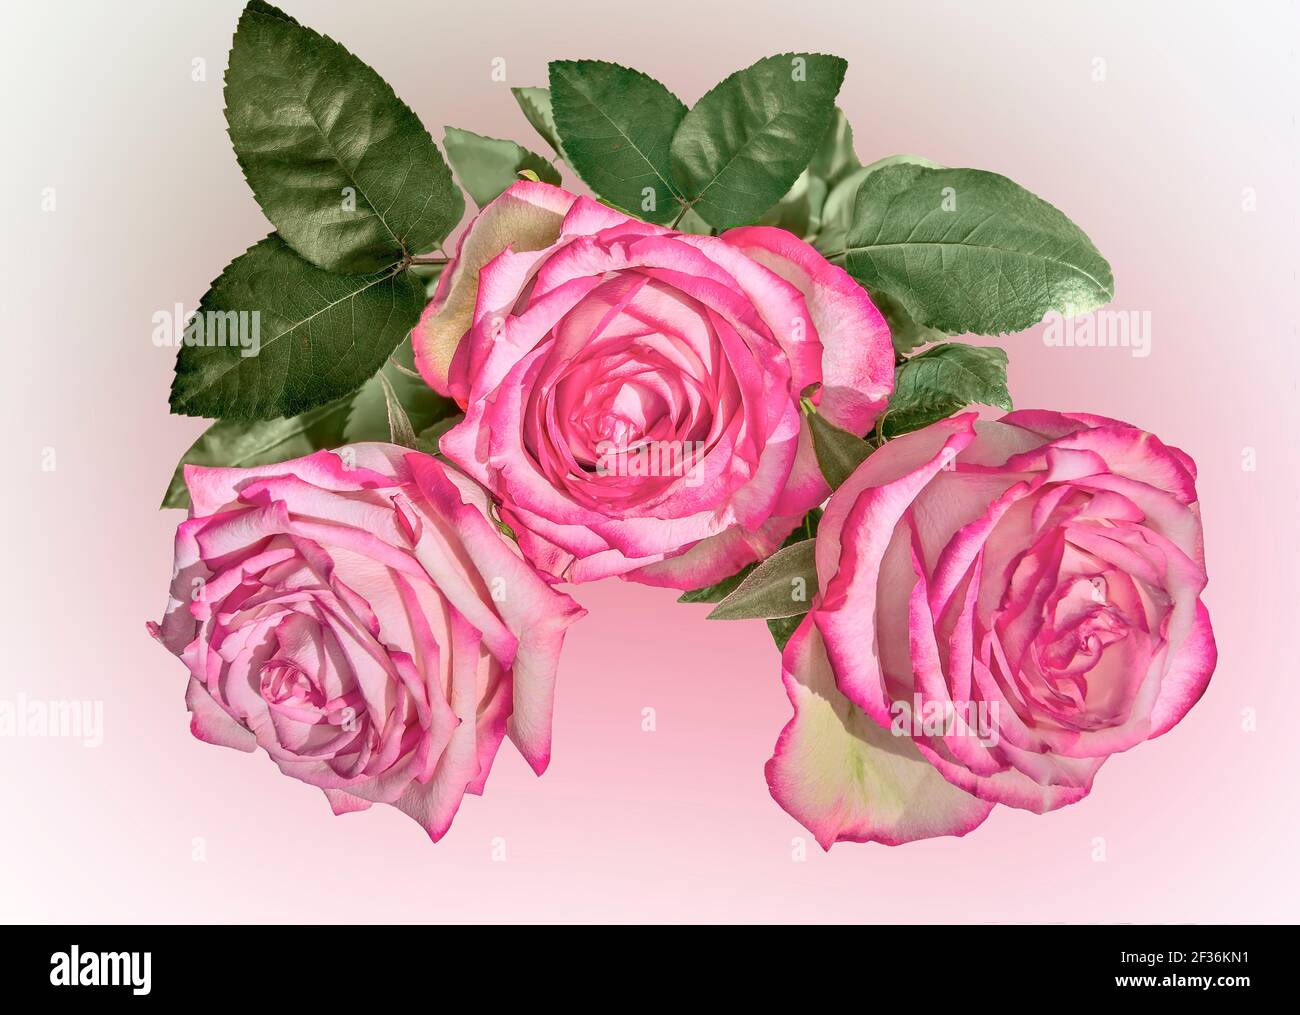 Three pale pink rose flowers with leaves on blurred pastel background. Festive floral design. Bouquet of delicate pale pink roses with vivid pink edge Stock Photo